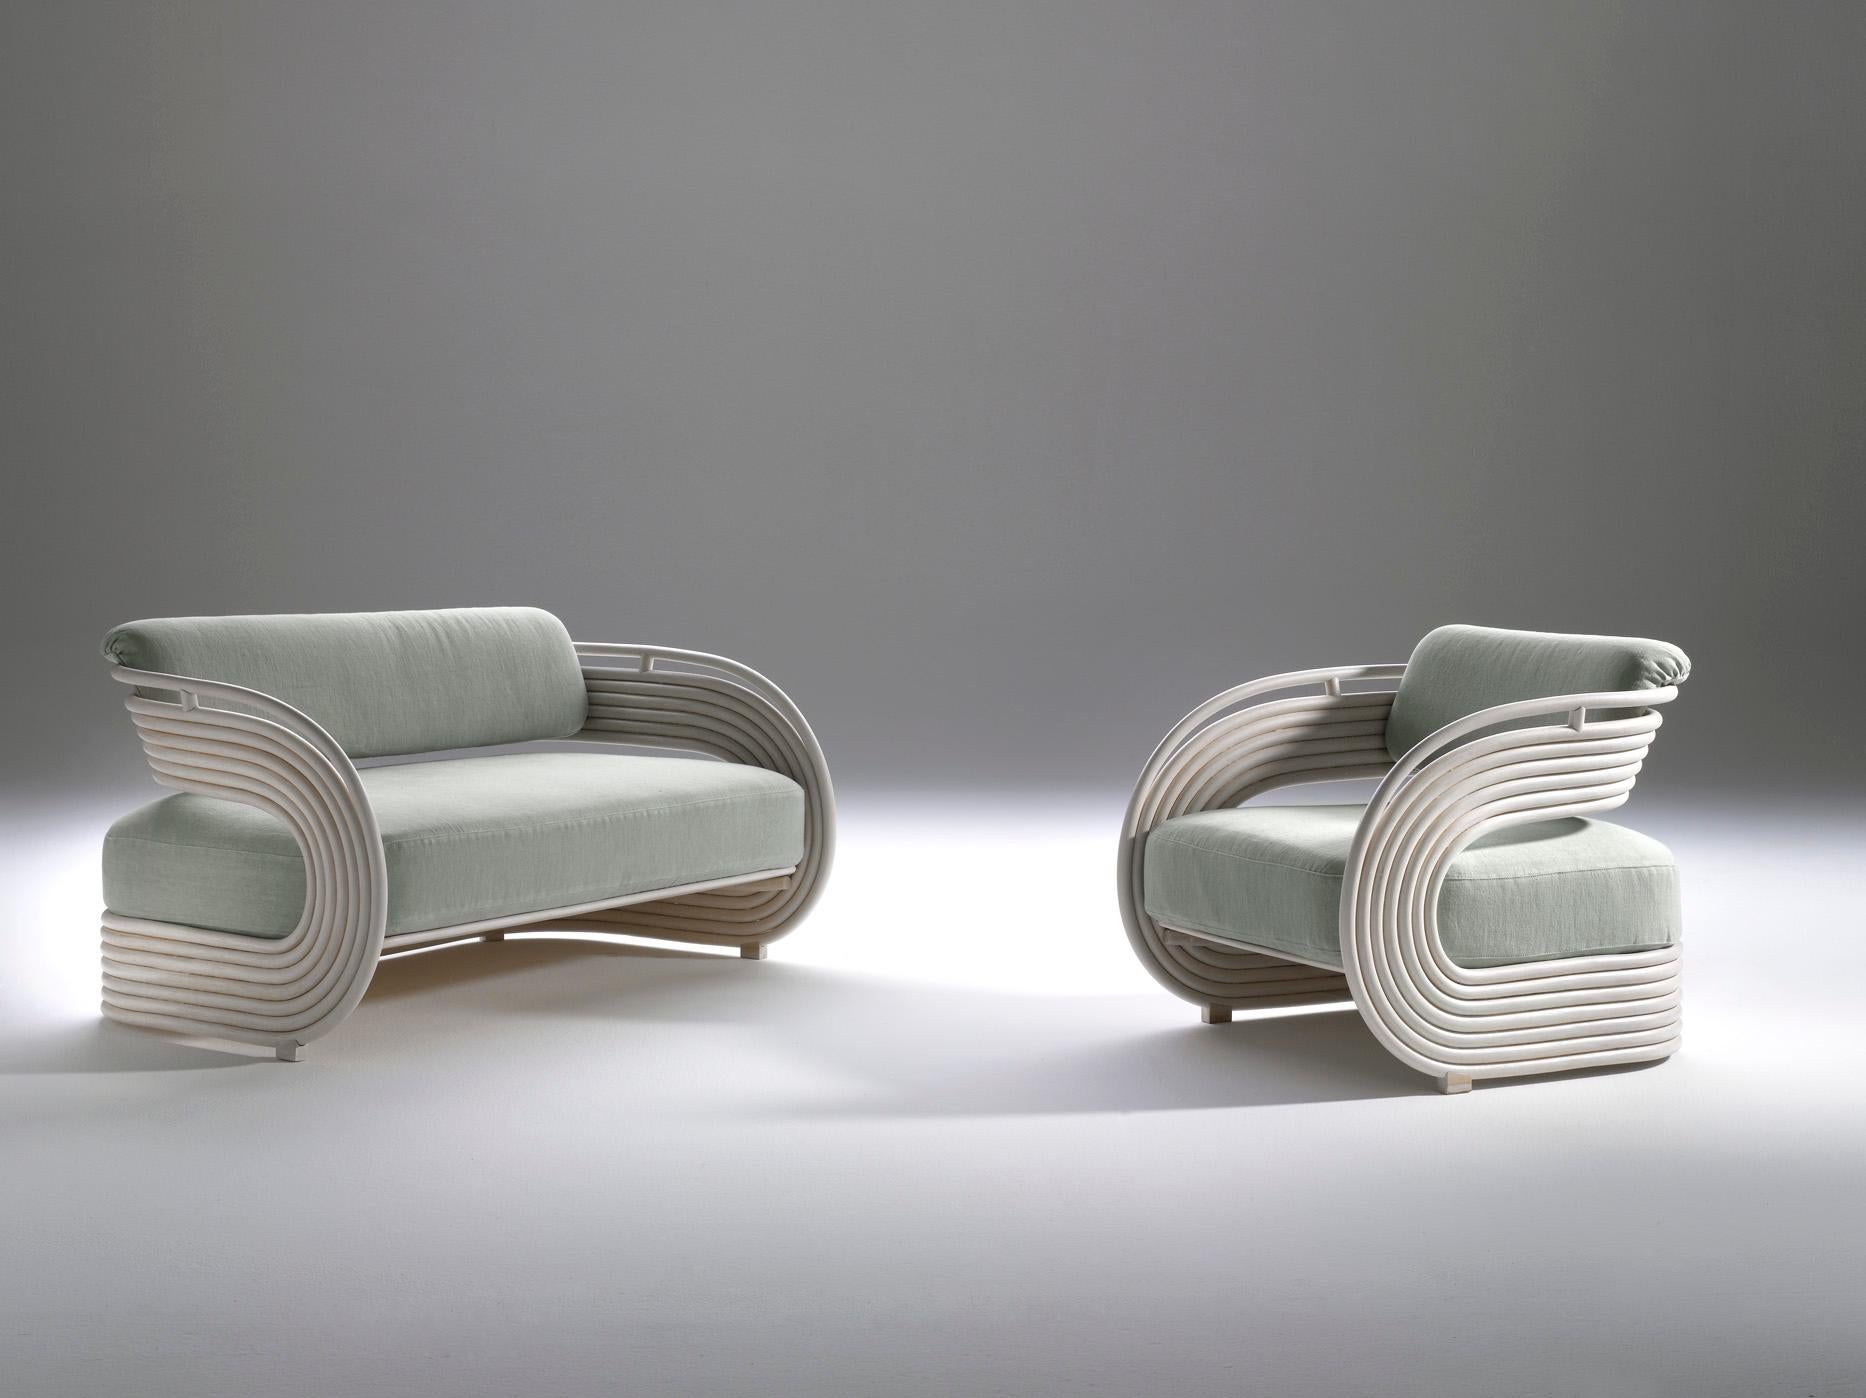 Design by Joe Colombo for Bonacina 1889, 1964.
Plastic and sculptural shape, low seat, bold finish and colors make this piece emblematic of the 1960s design, a period that conceives furnishing objects as works of art, with which to give voice to